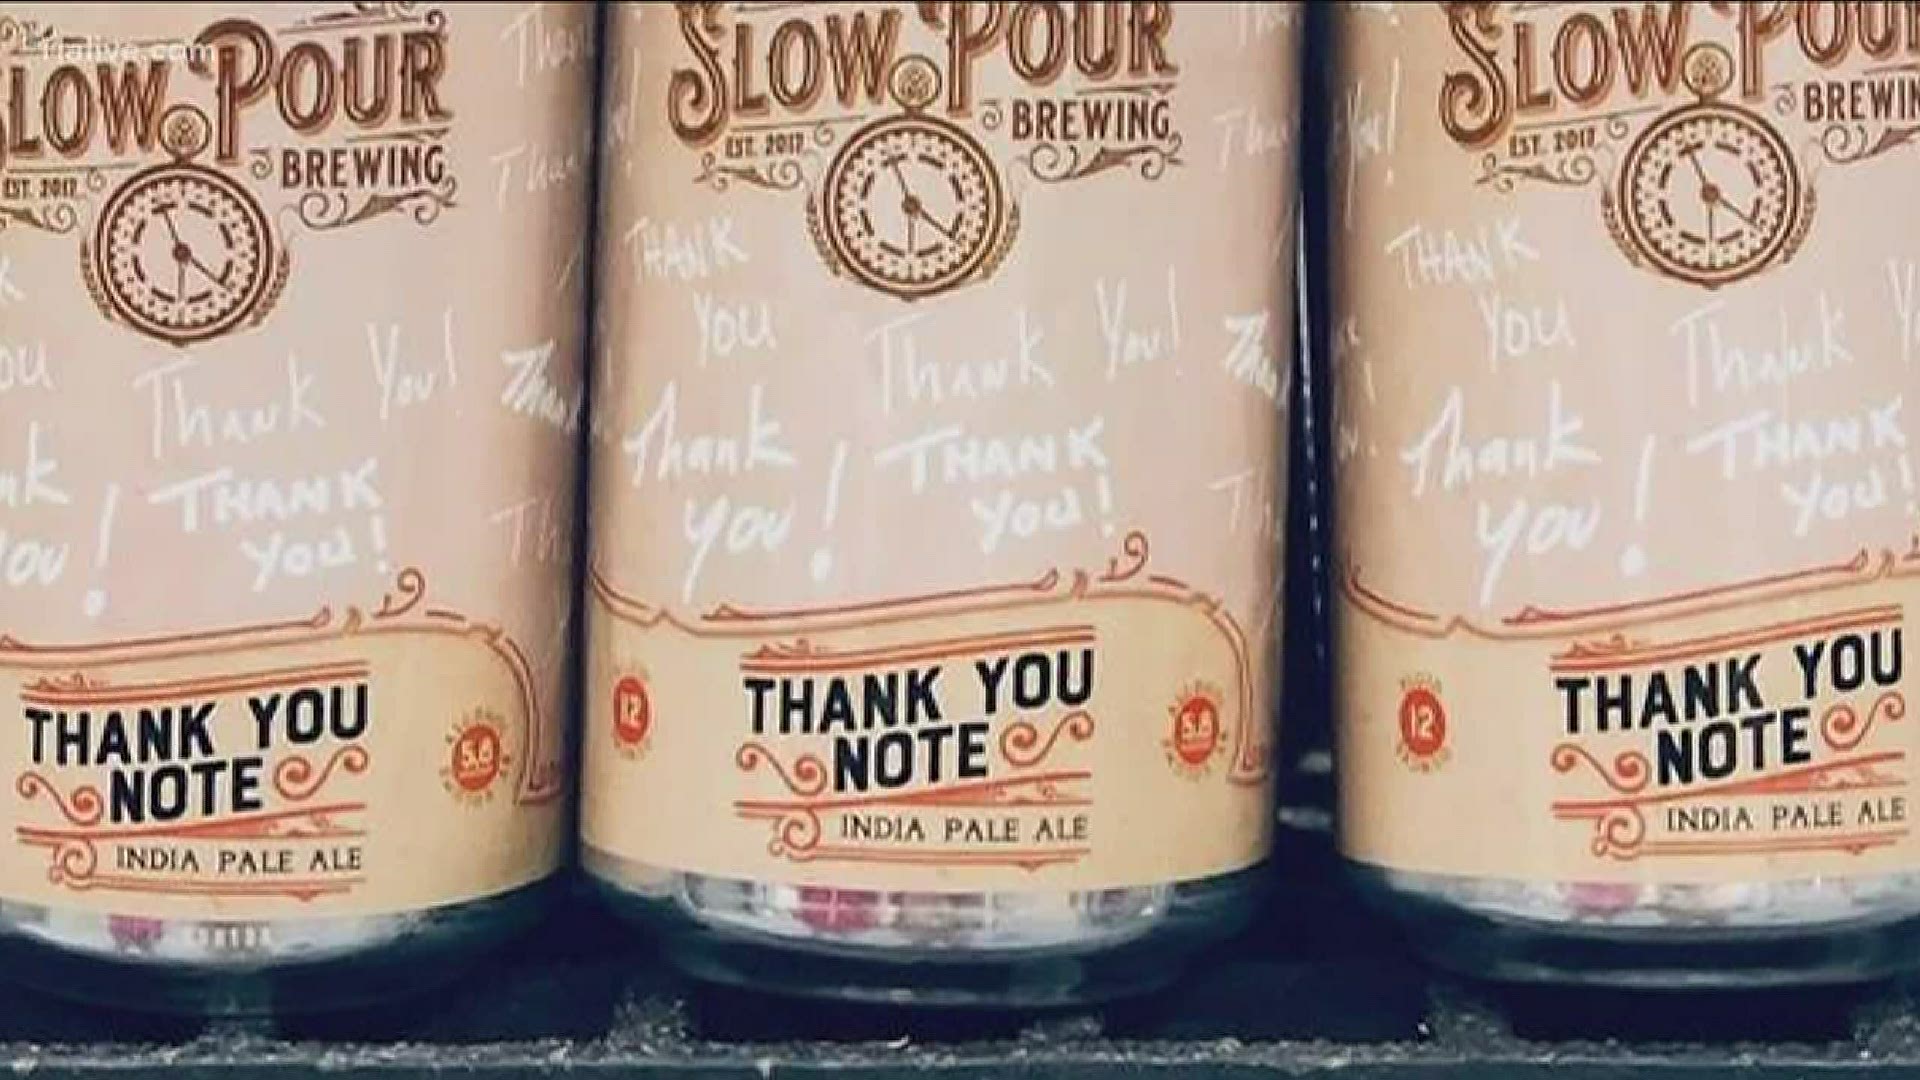 Slow Pour Brewing Company releases IPA called 'Thank You Note' to be given to health care professionals for free.